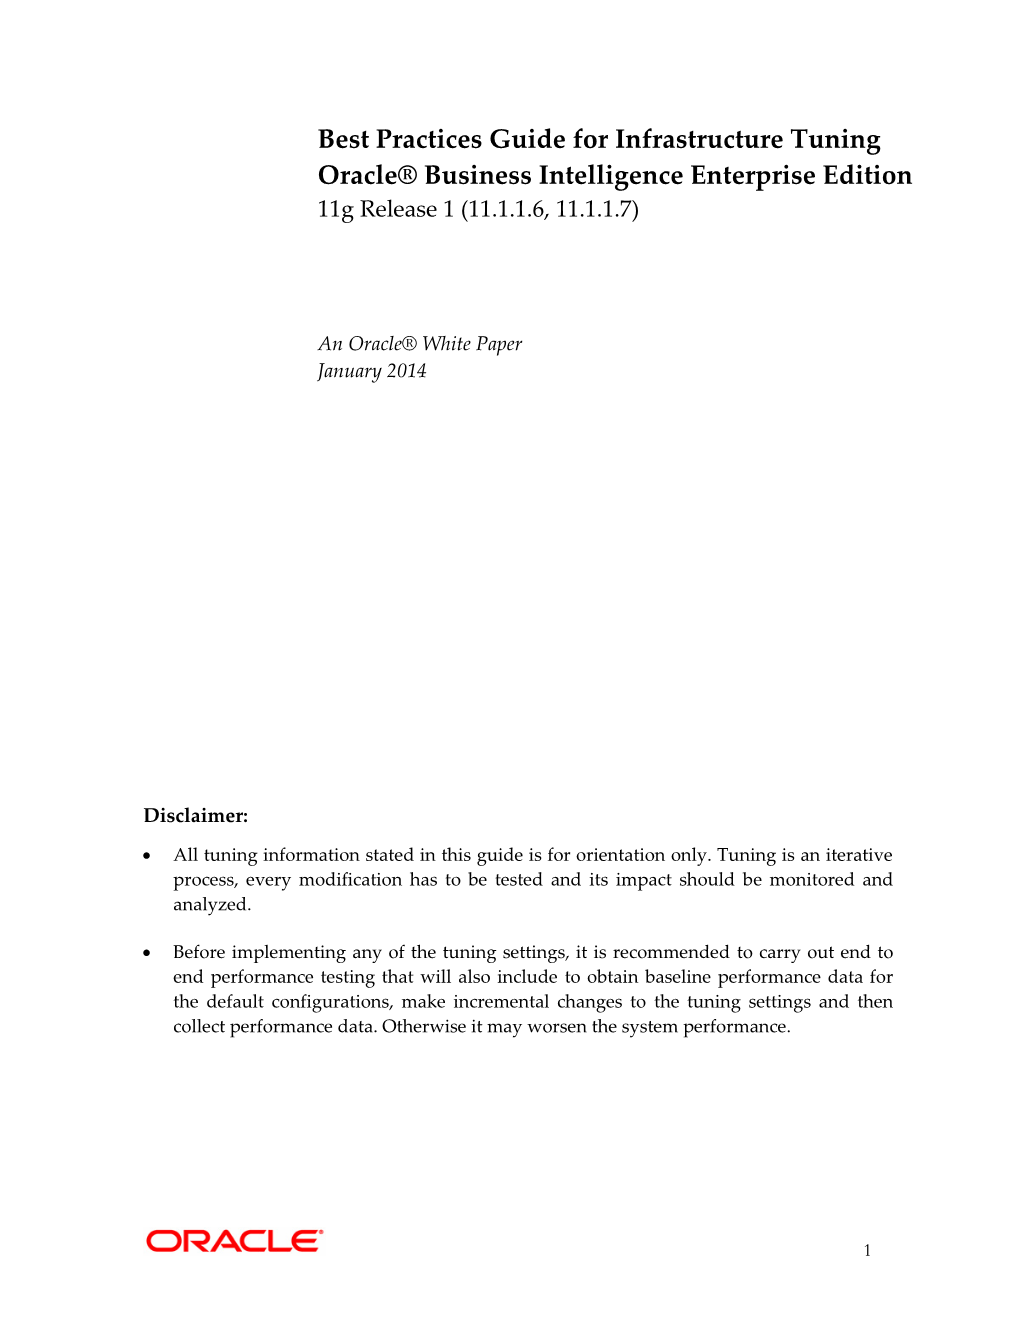 Best Practices Guide for Infrastructure Tuning Oracle® Business Intelligence Enterprise Edition